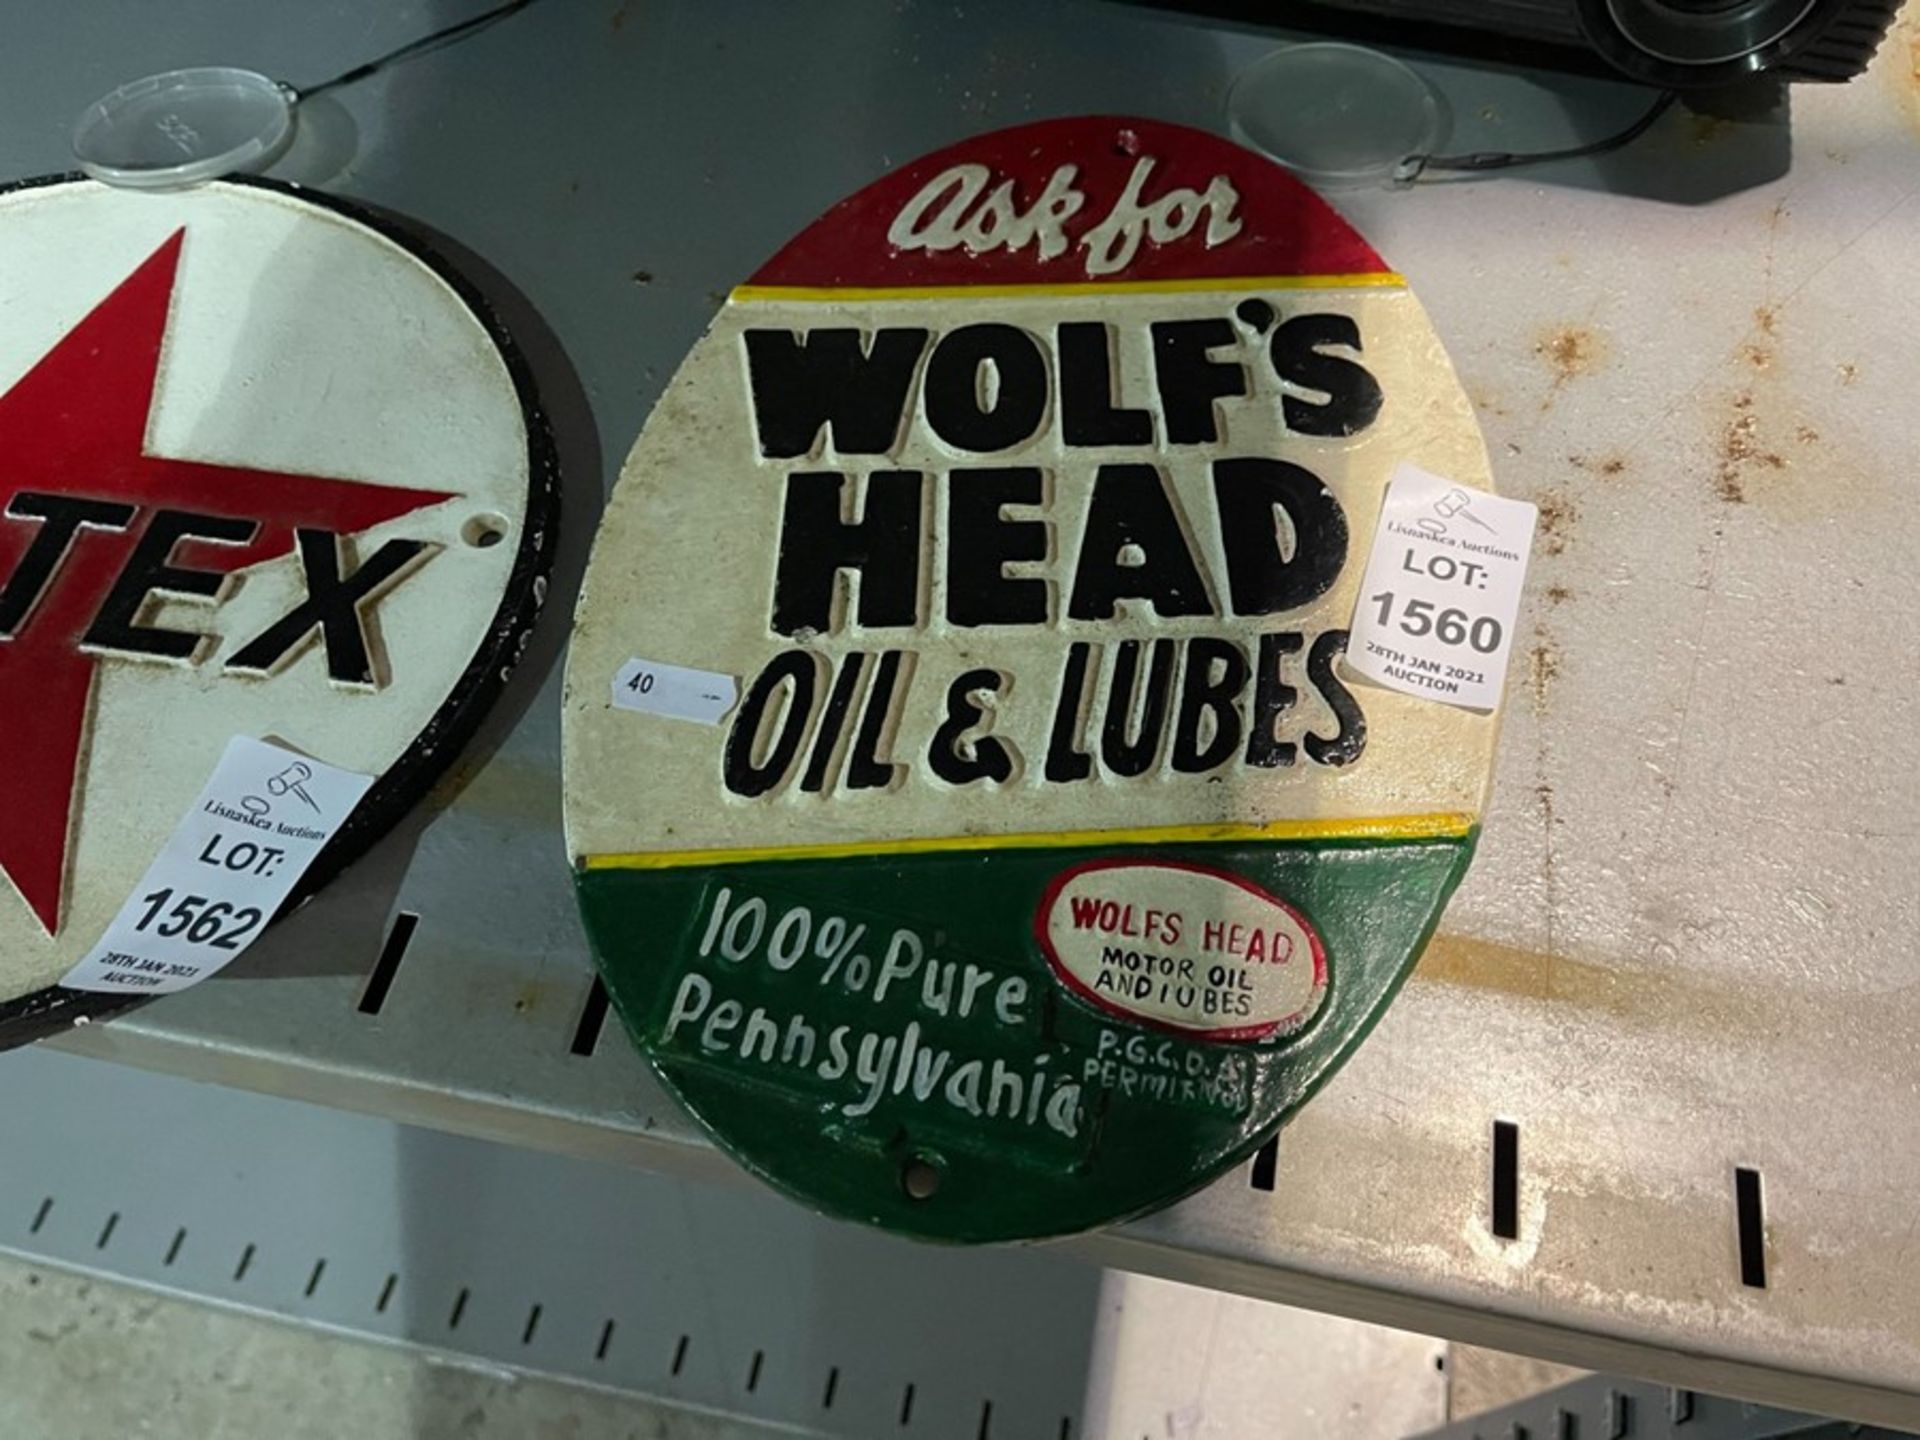 WOLF'S HEAD OIL & LUBES CAST IRON PLAQUE